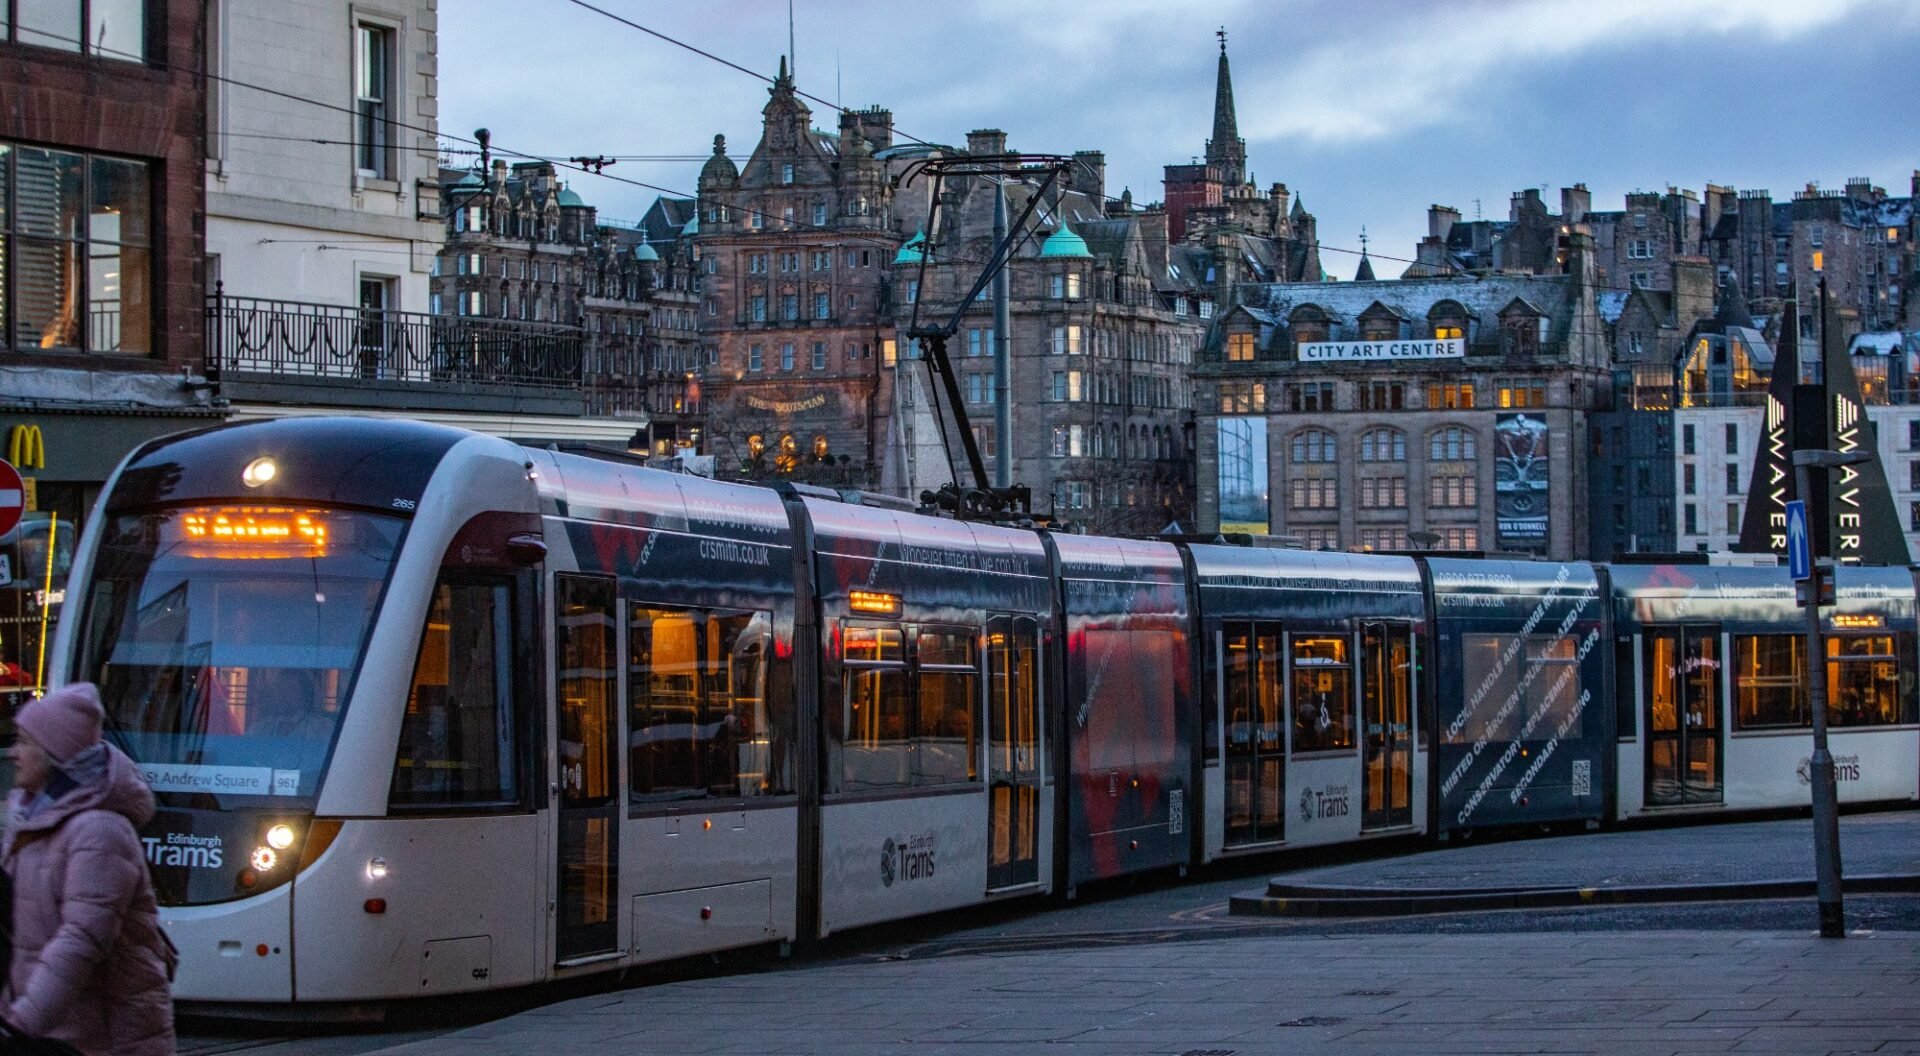 Edinburgh Tram with Old Town View